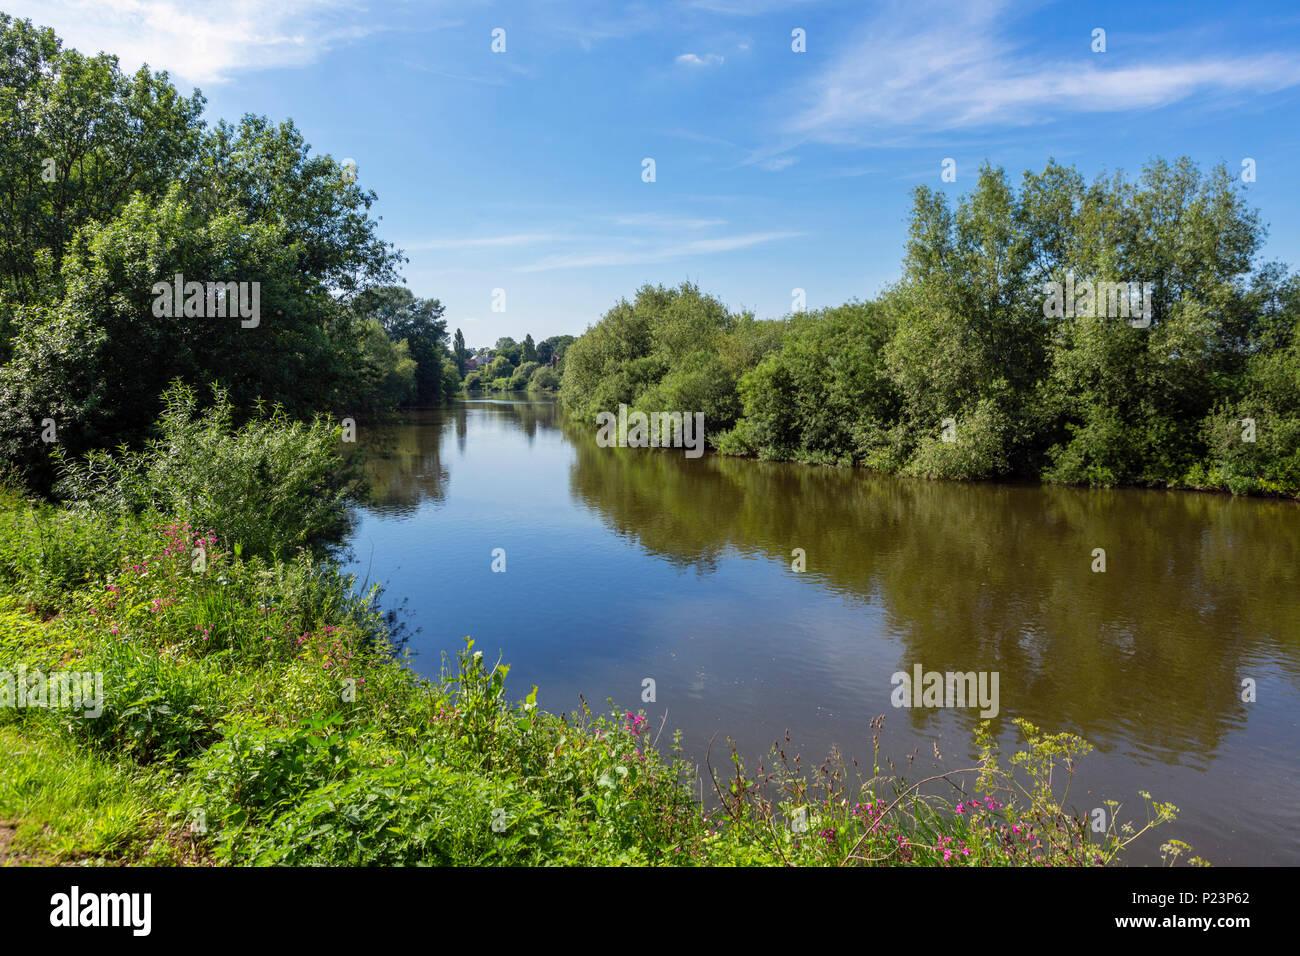 View of the River Wye from the River Walk, Ross-on-Wye, Herefordshire, England, UK Stock Photo